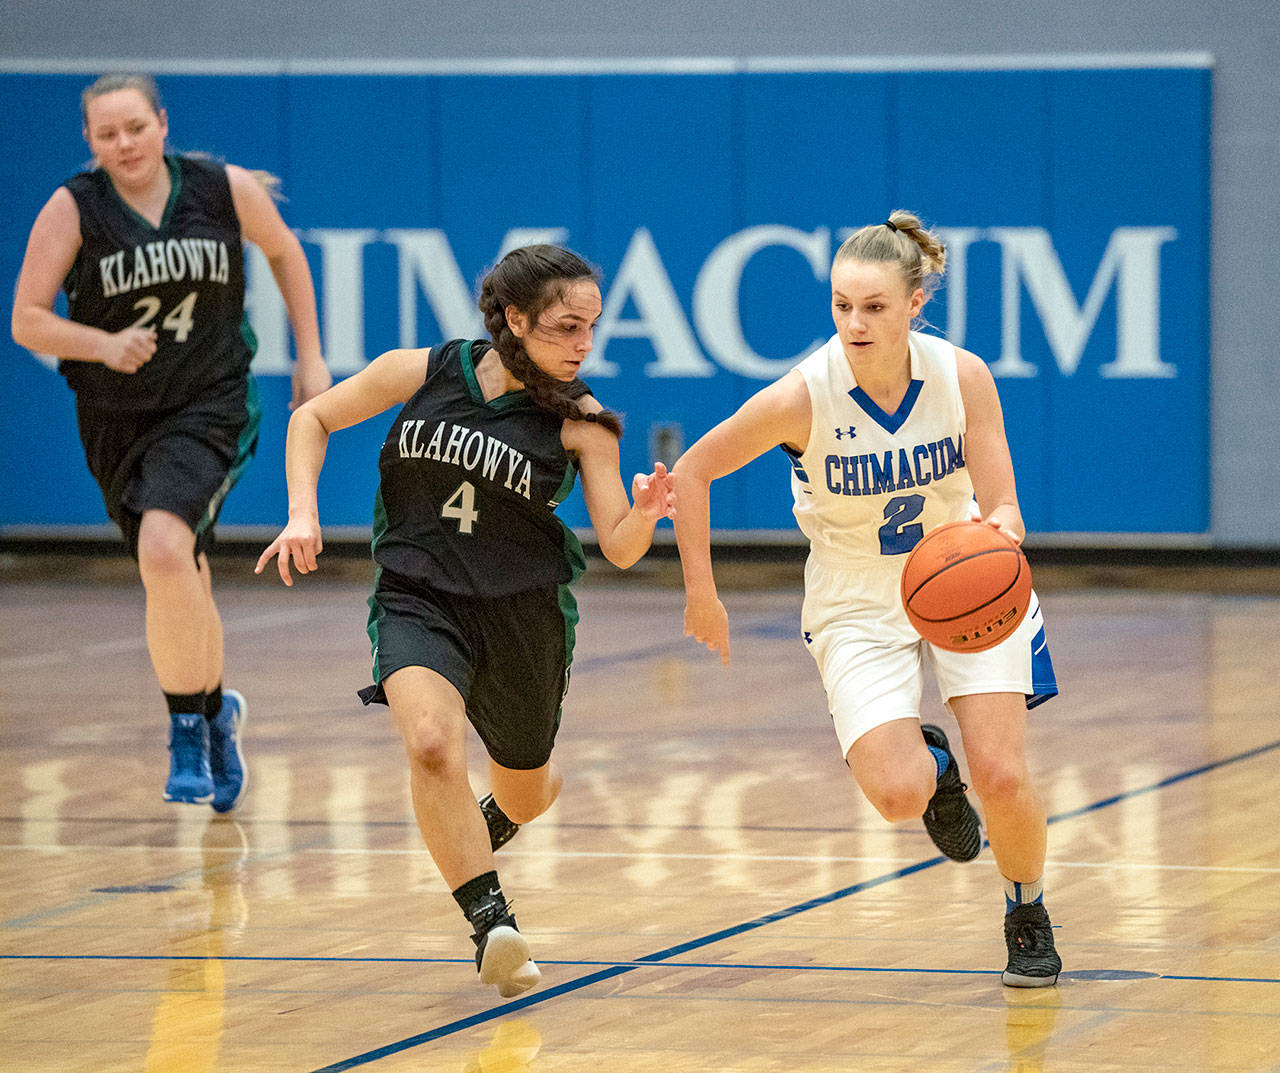 Steve Mullensky/for Peninsula Daily News Chimacum’s Jada Trafton, right, dribbles past Klahowya’s Maile Lueck during a game in Chimacum on Friday.